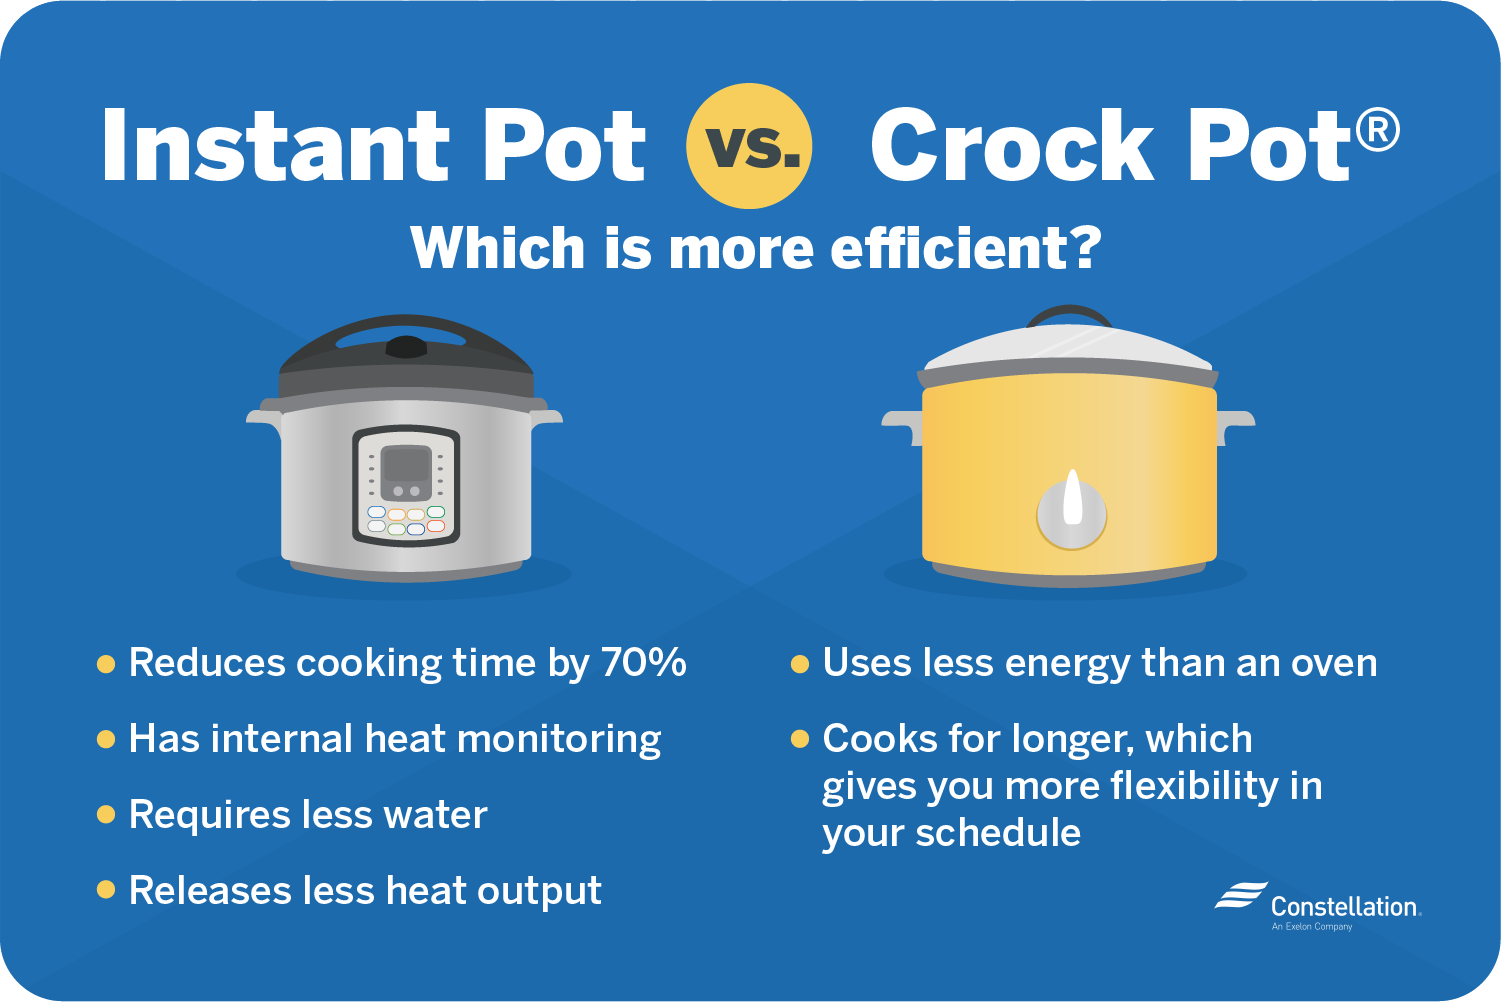 Instant Pot® vs. CrockPot® Which Uses More Energy? Constellation